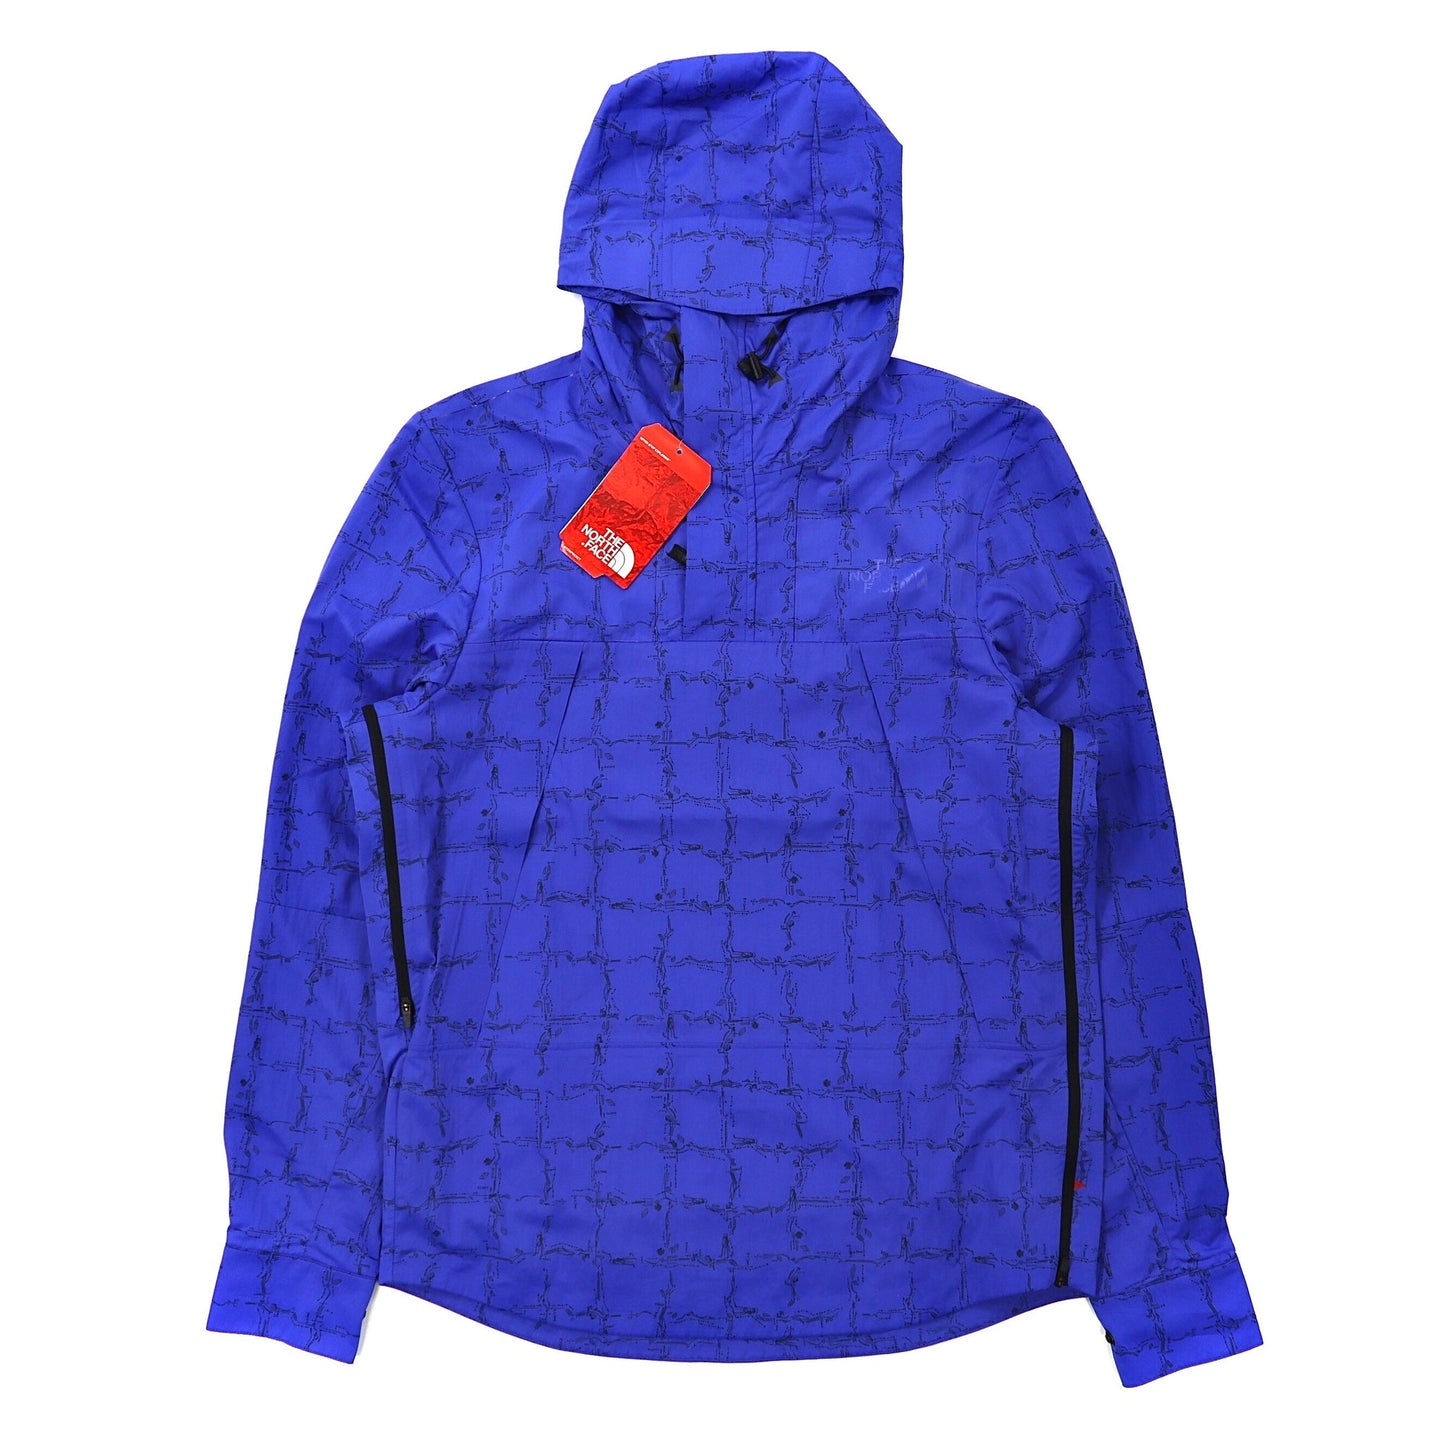 THE NORTH FACE RED LABEL × SLAM JAM Anorak Hoodie S Blue